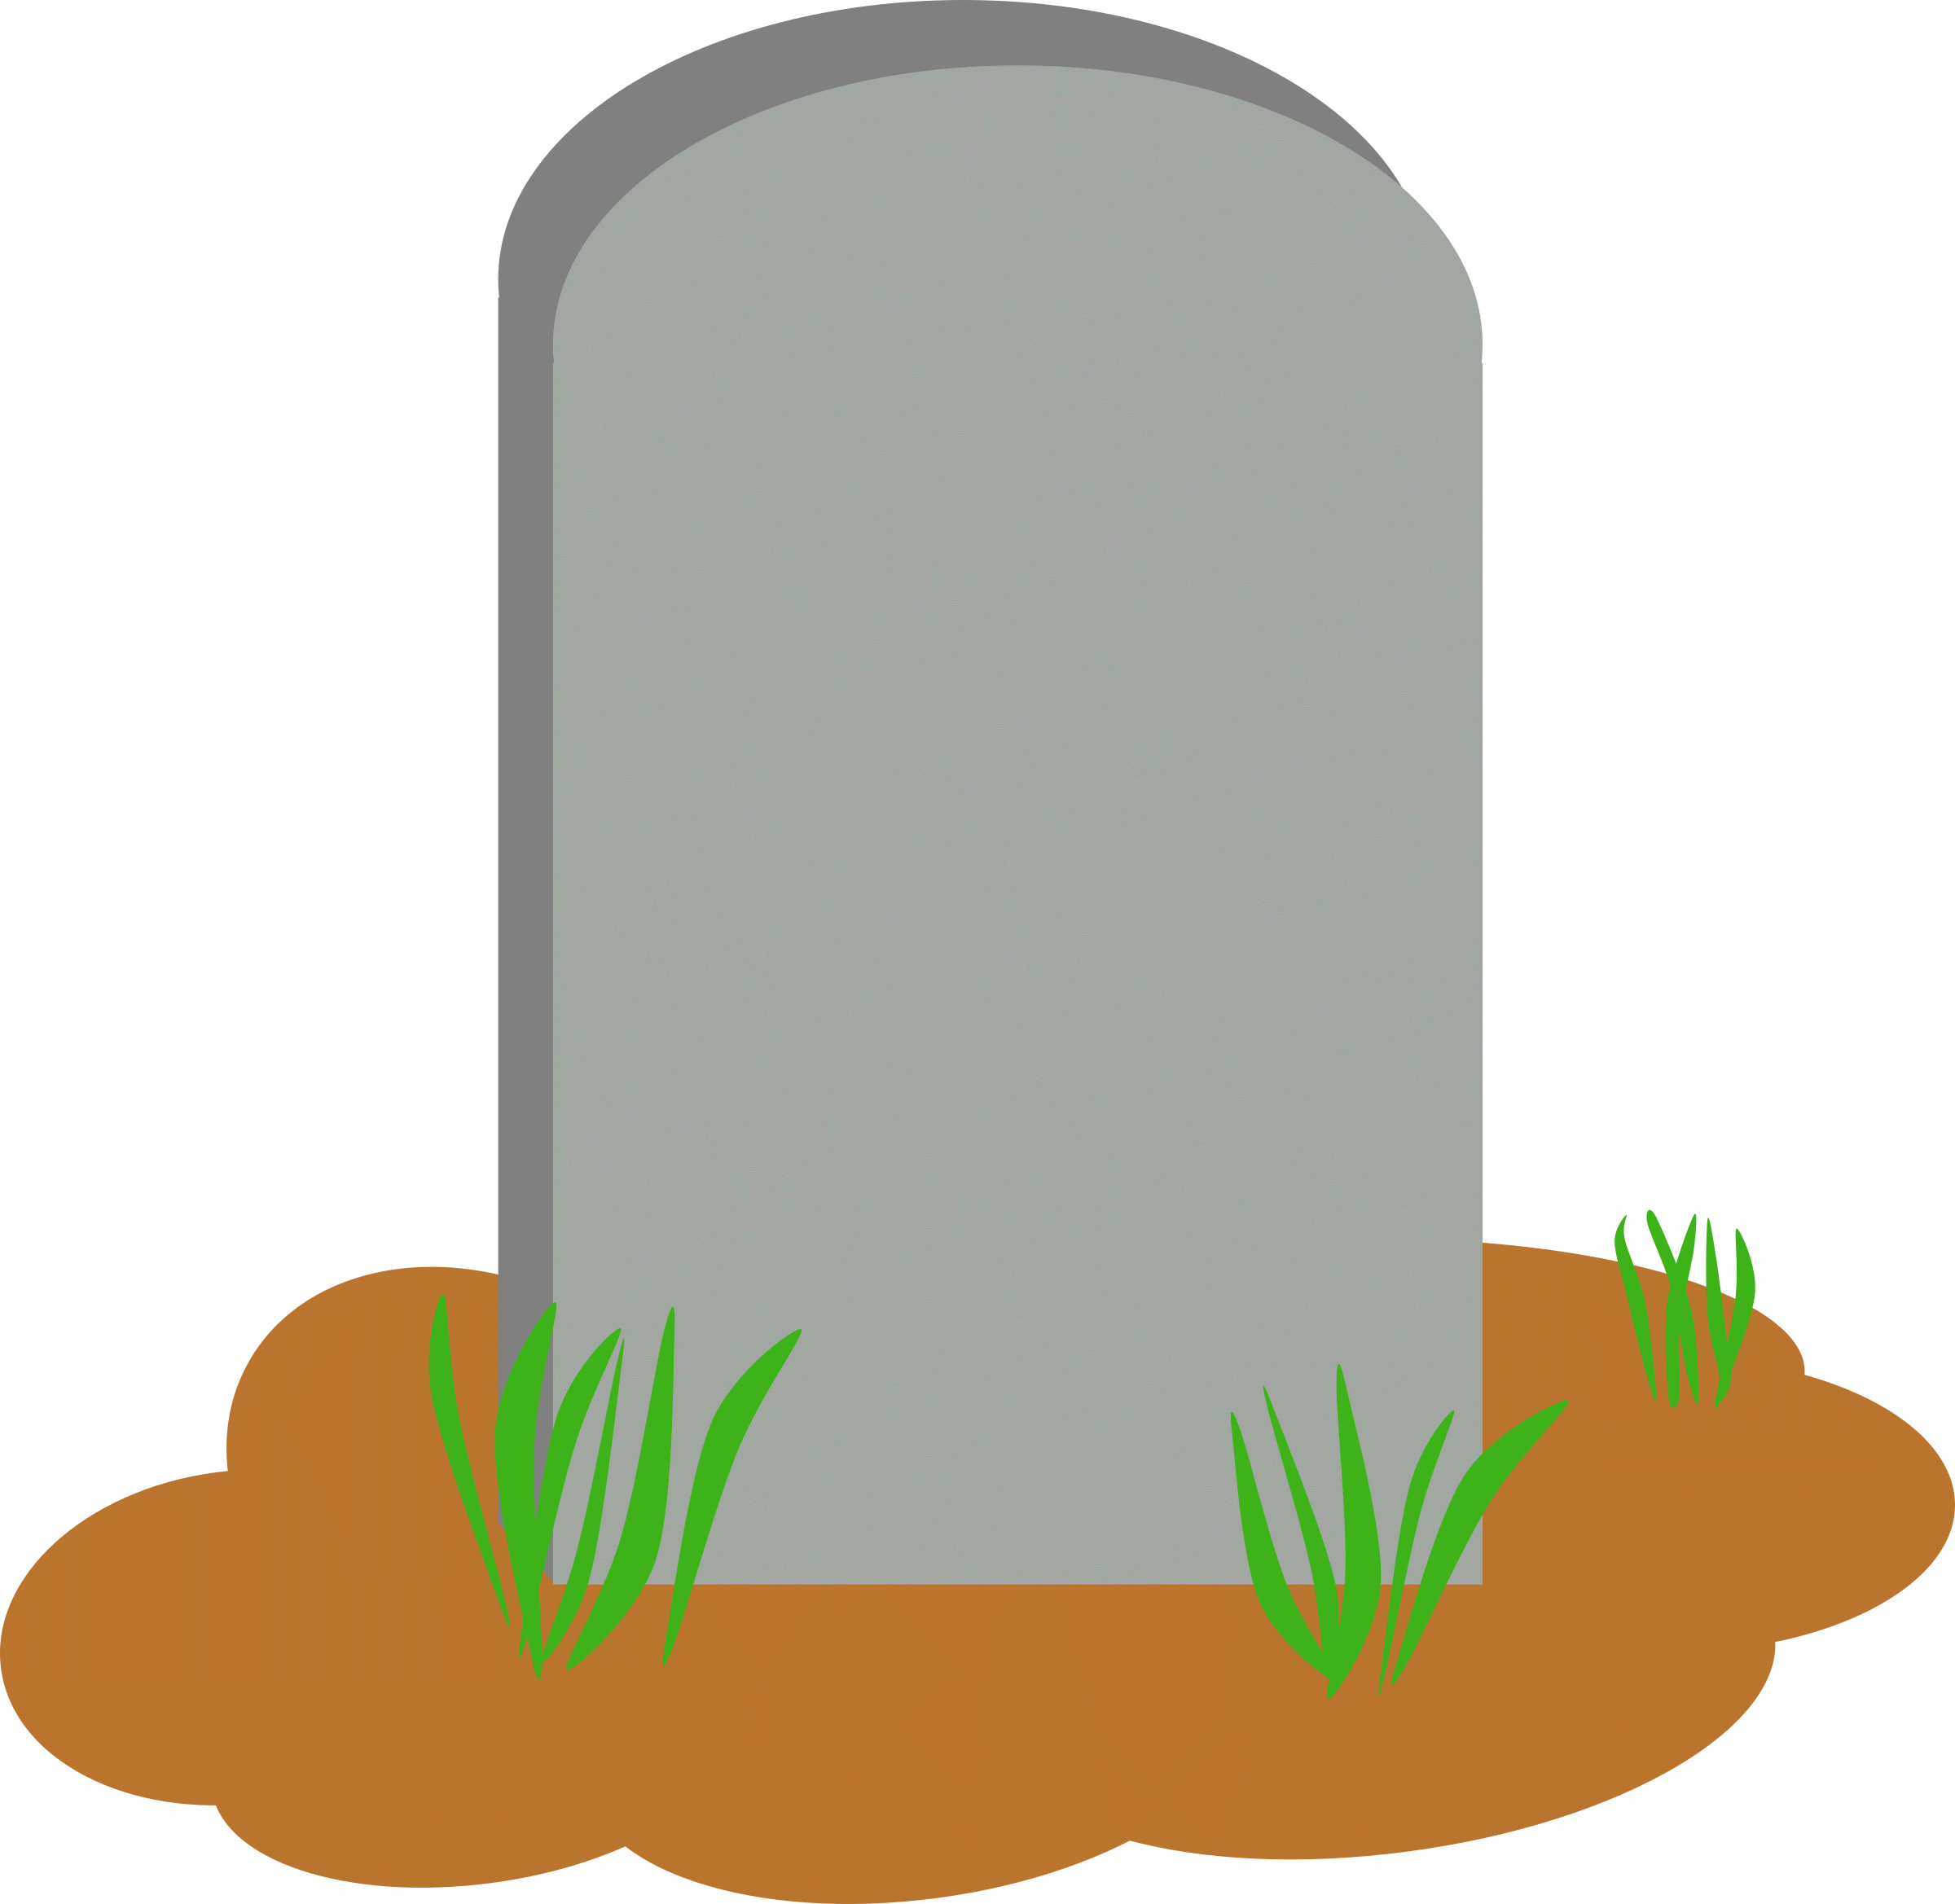 Gravestone Clipart Grave Marker and other clipart images on Cliparts pub ™.